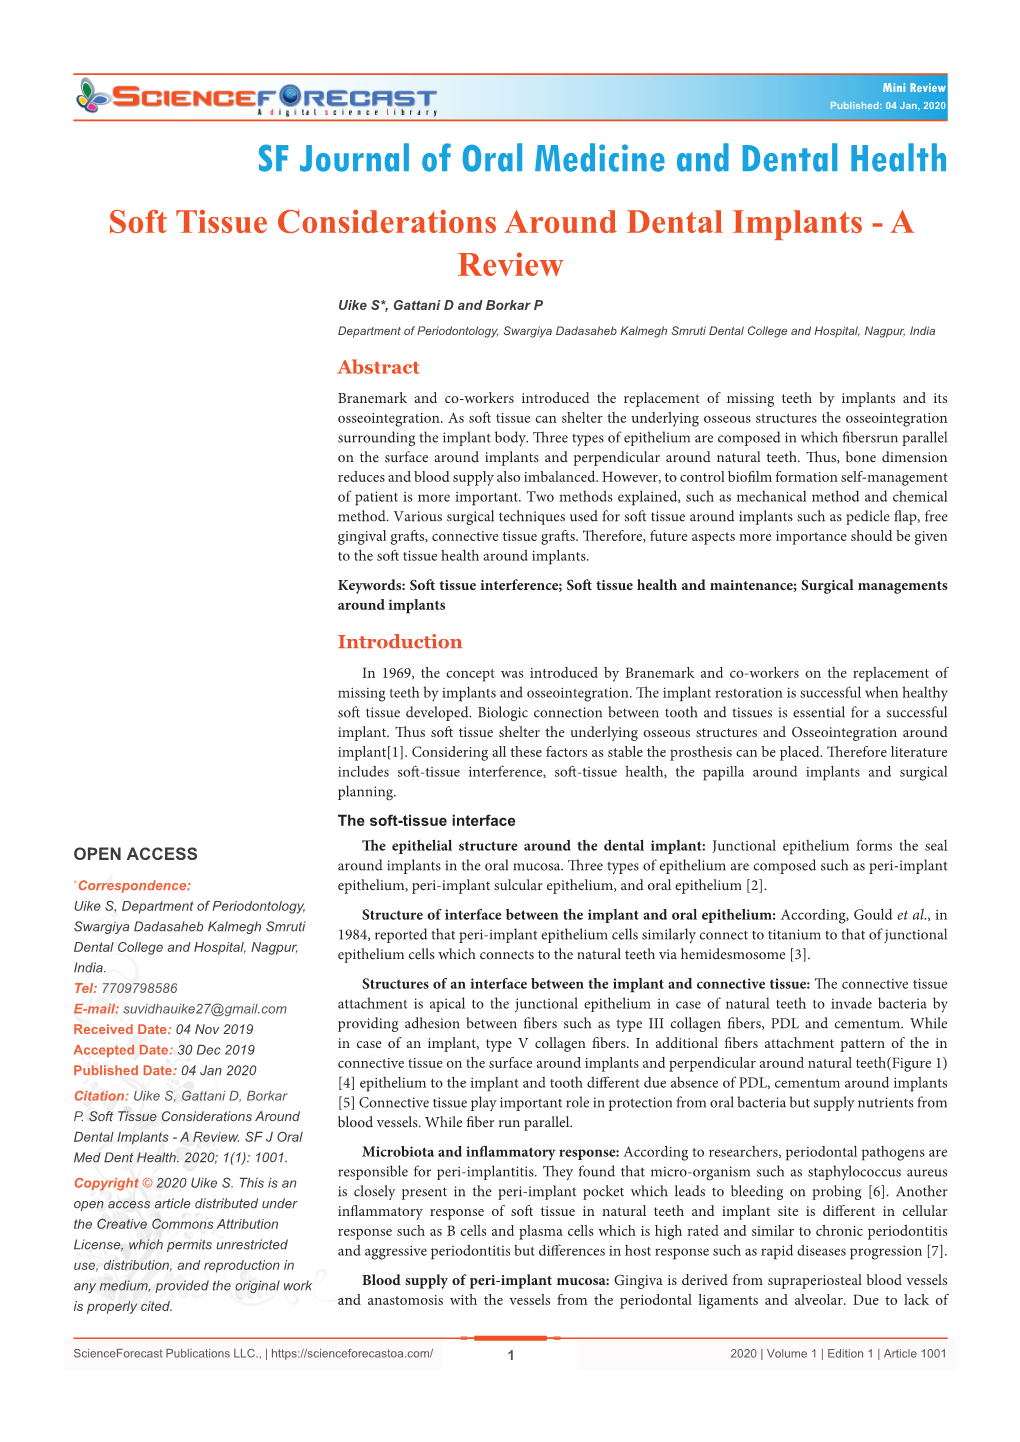 Soft Tissue Considerations Around Dental Implants - a Review